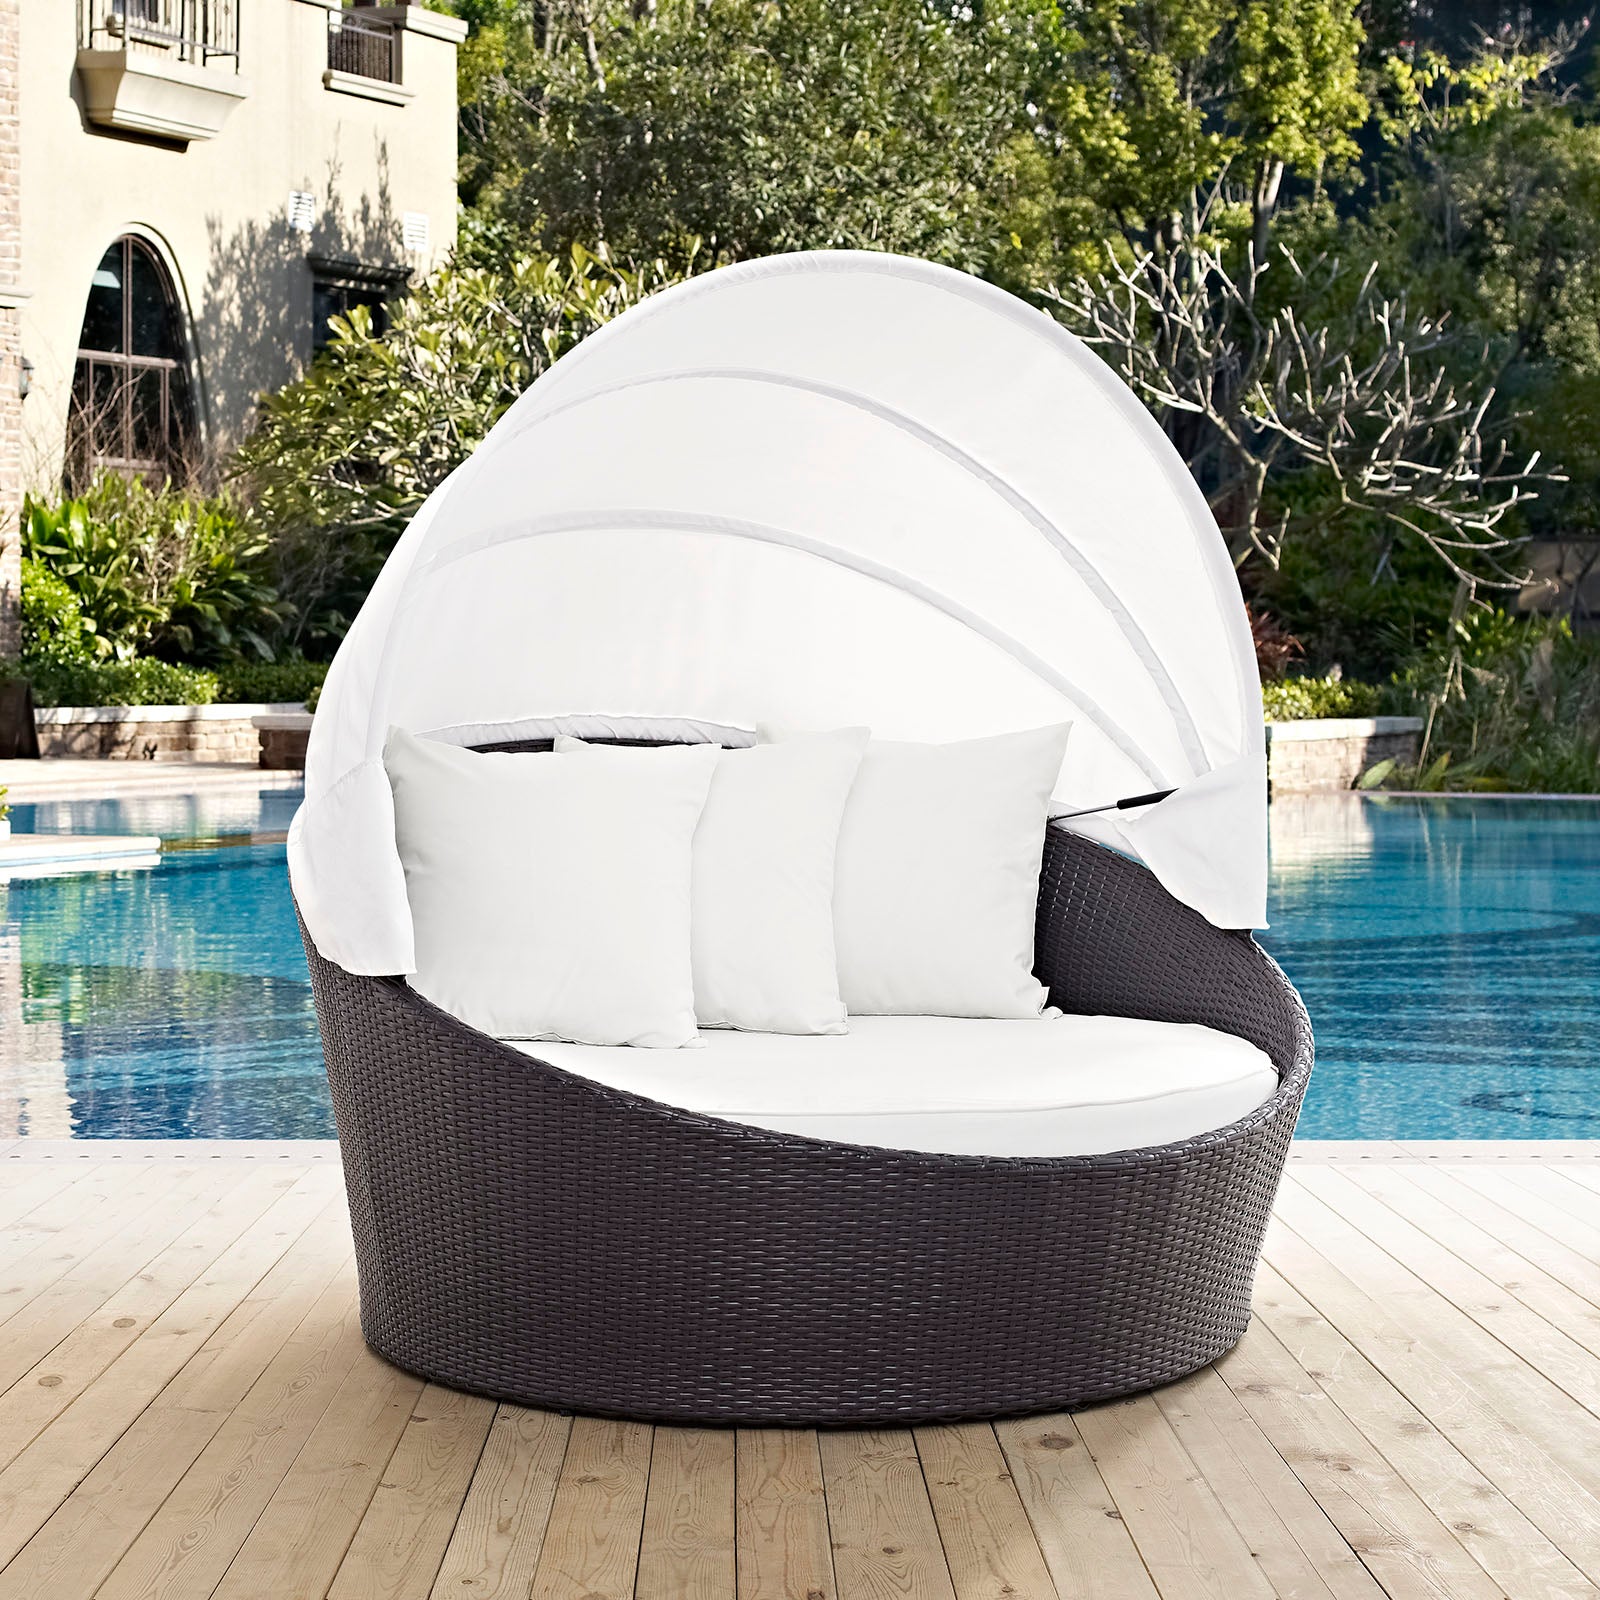 Modway Patio Daybeds - Convene Canopy Outdoor Patio 63"W Daybed Espresso White